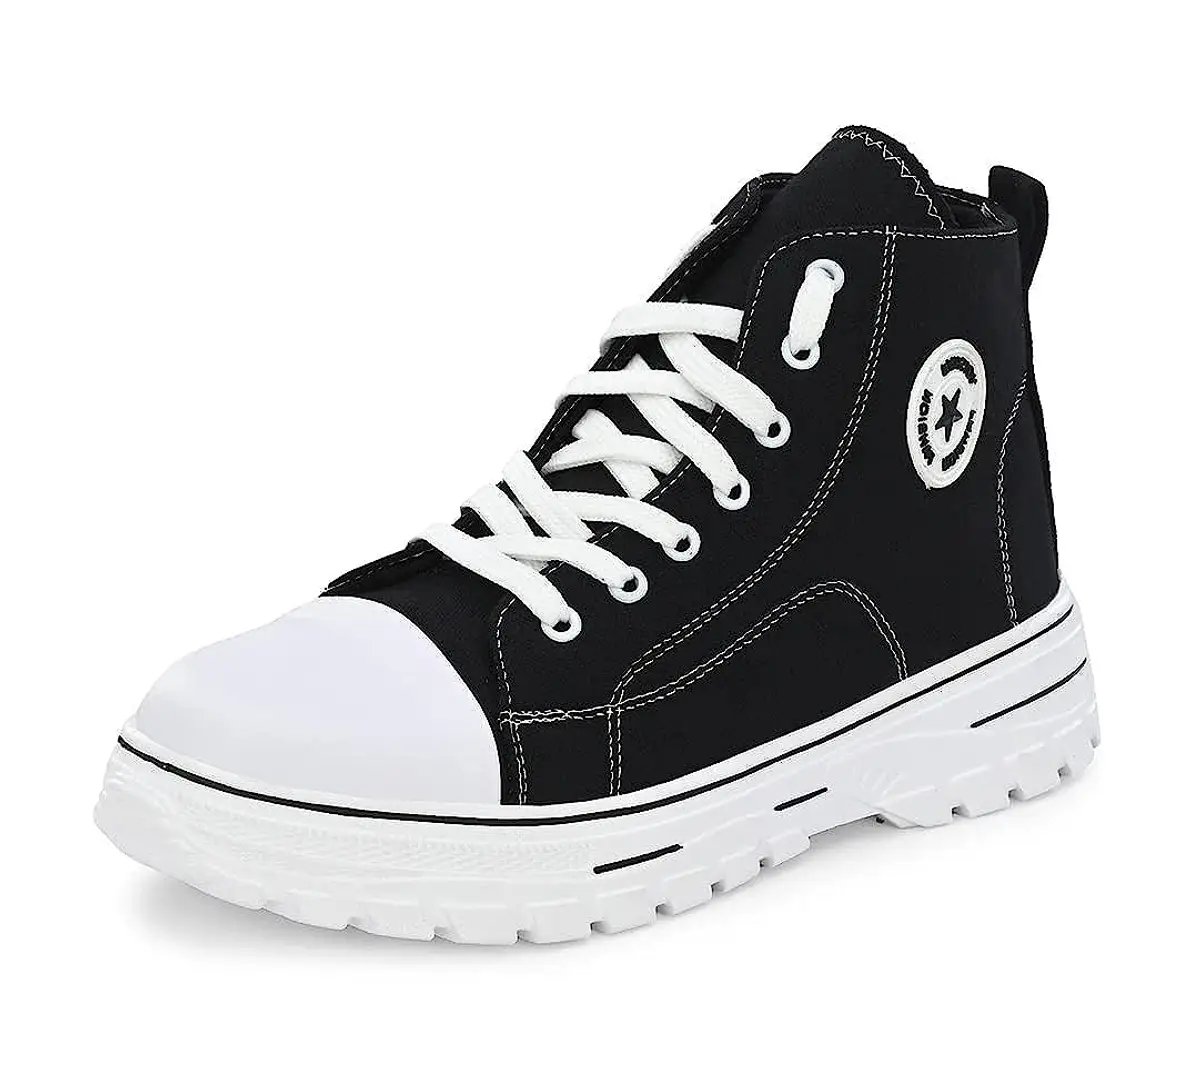 Buy Cogs Grey Exclusive Range of Sneakers Shoes for Women_4 at Amazon.in